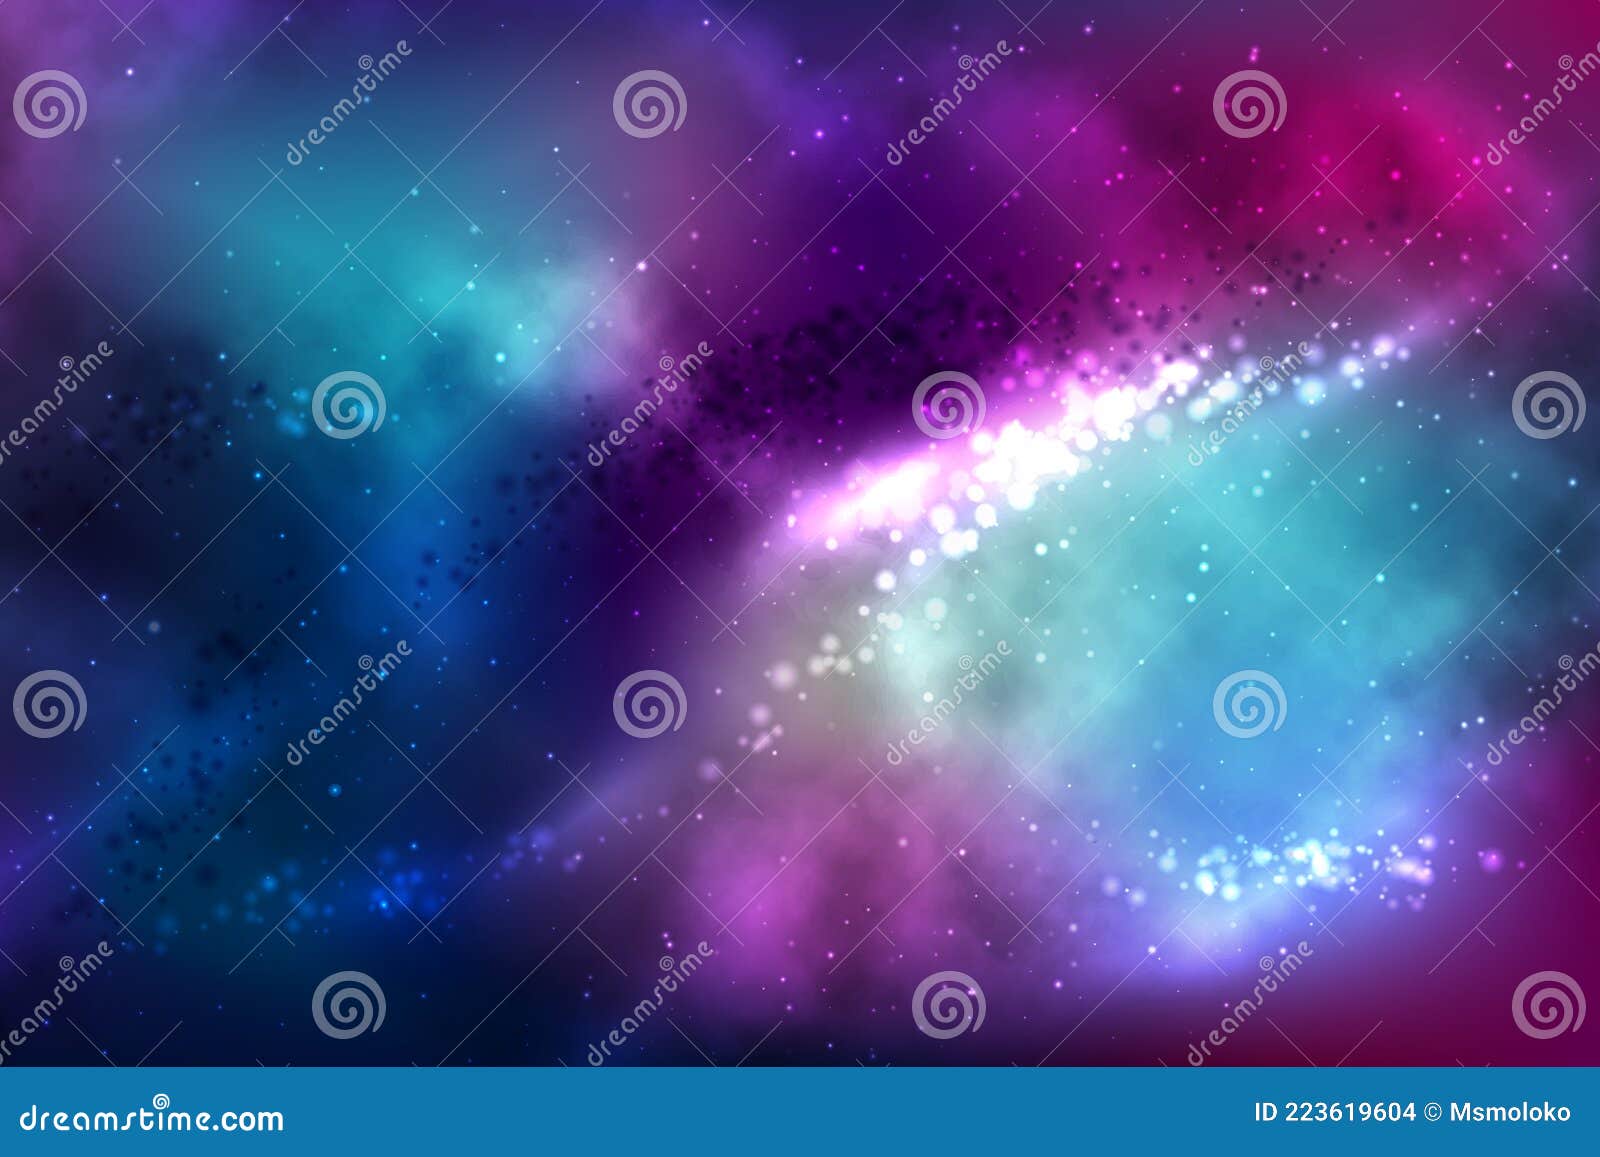 Vector Space Background with Colorful Nebula and Bright Stars. Stock ...